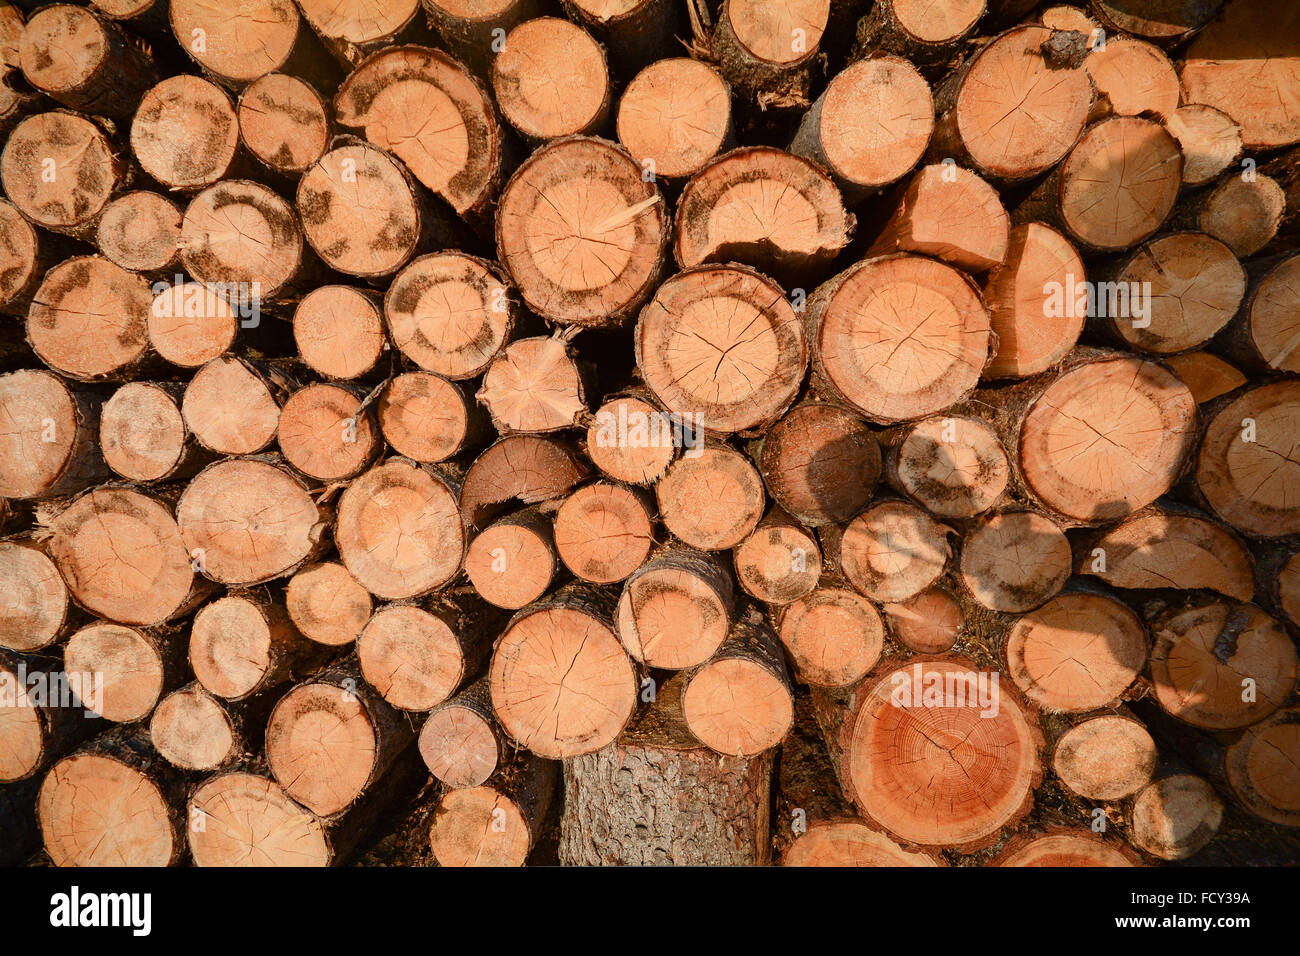 A stack of firewood in front of a barn, Alps Tyrol Austria Stock Photo